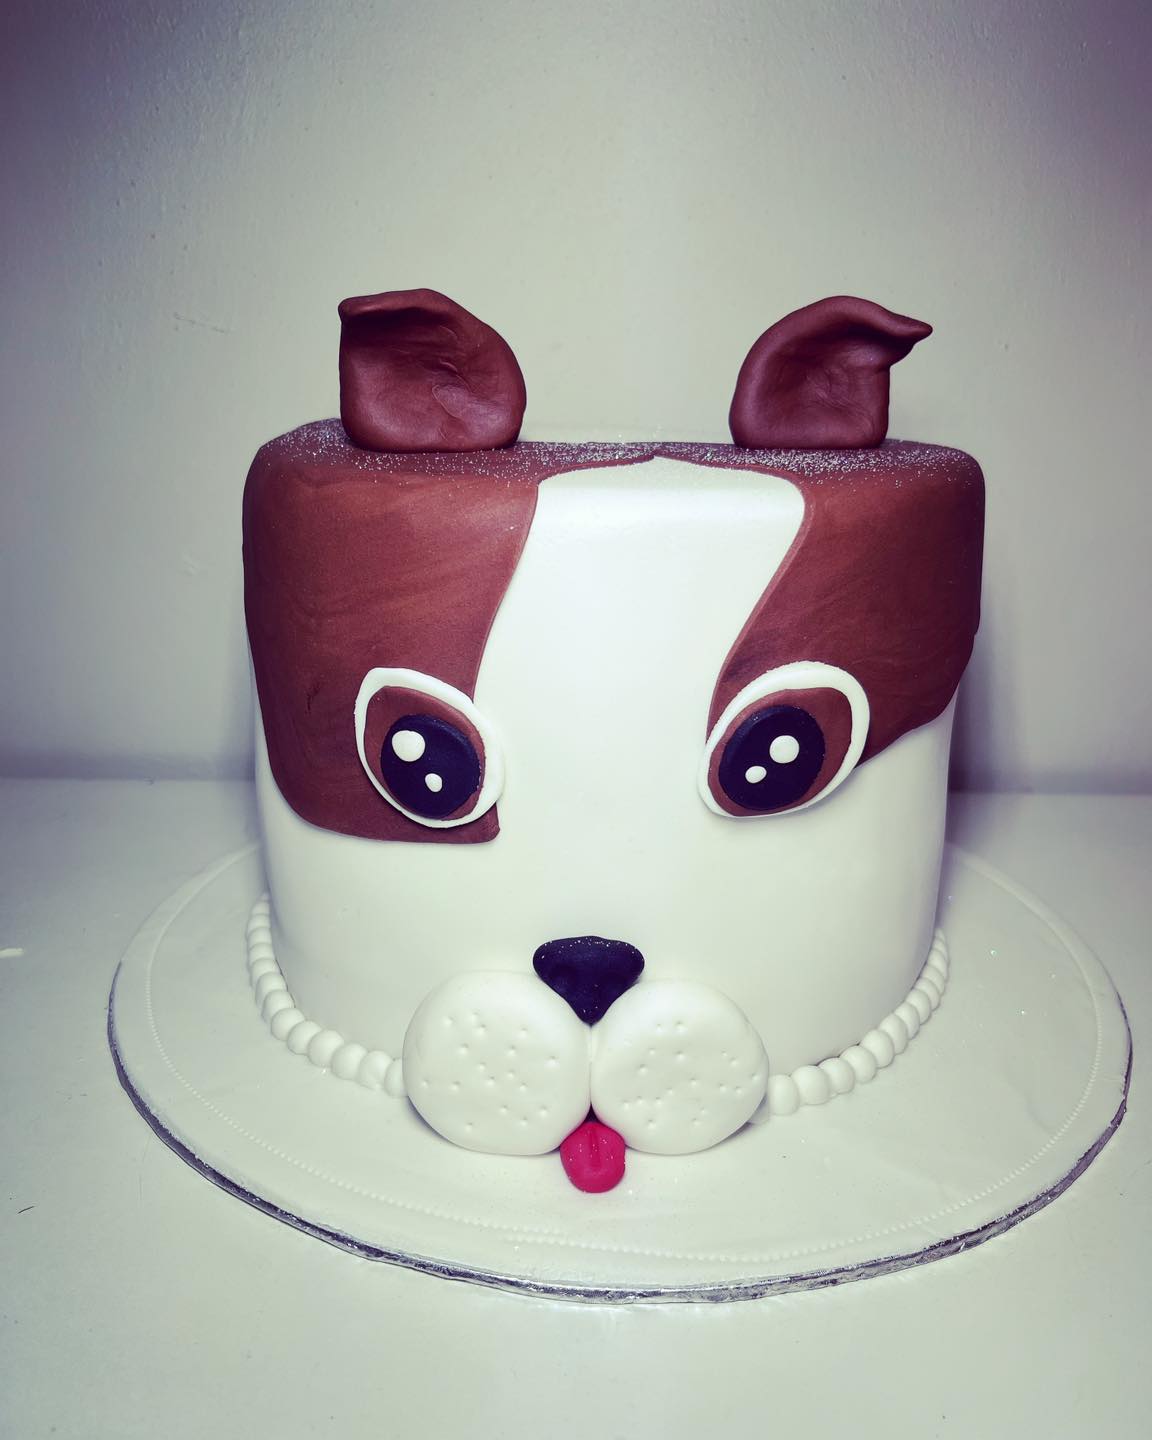 Jack Russel cake, corporate cakes, birthday cakes, cake, cape town cakes, novelty cakes, southern peninsula, cakes for kids, cakes for ladies, cakes for men